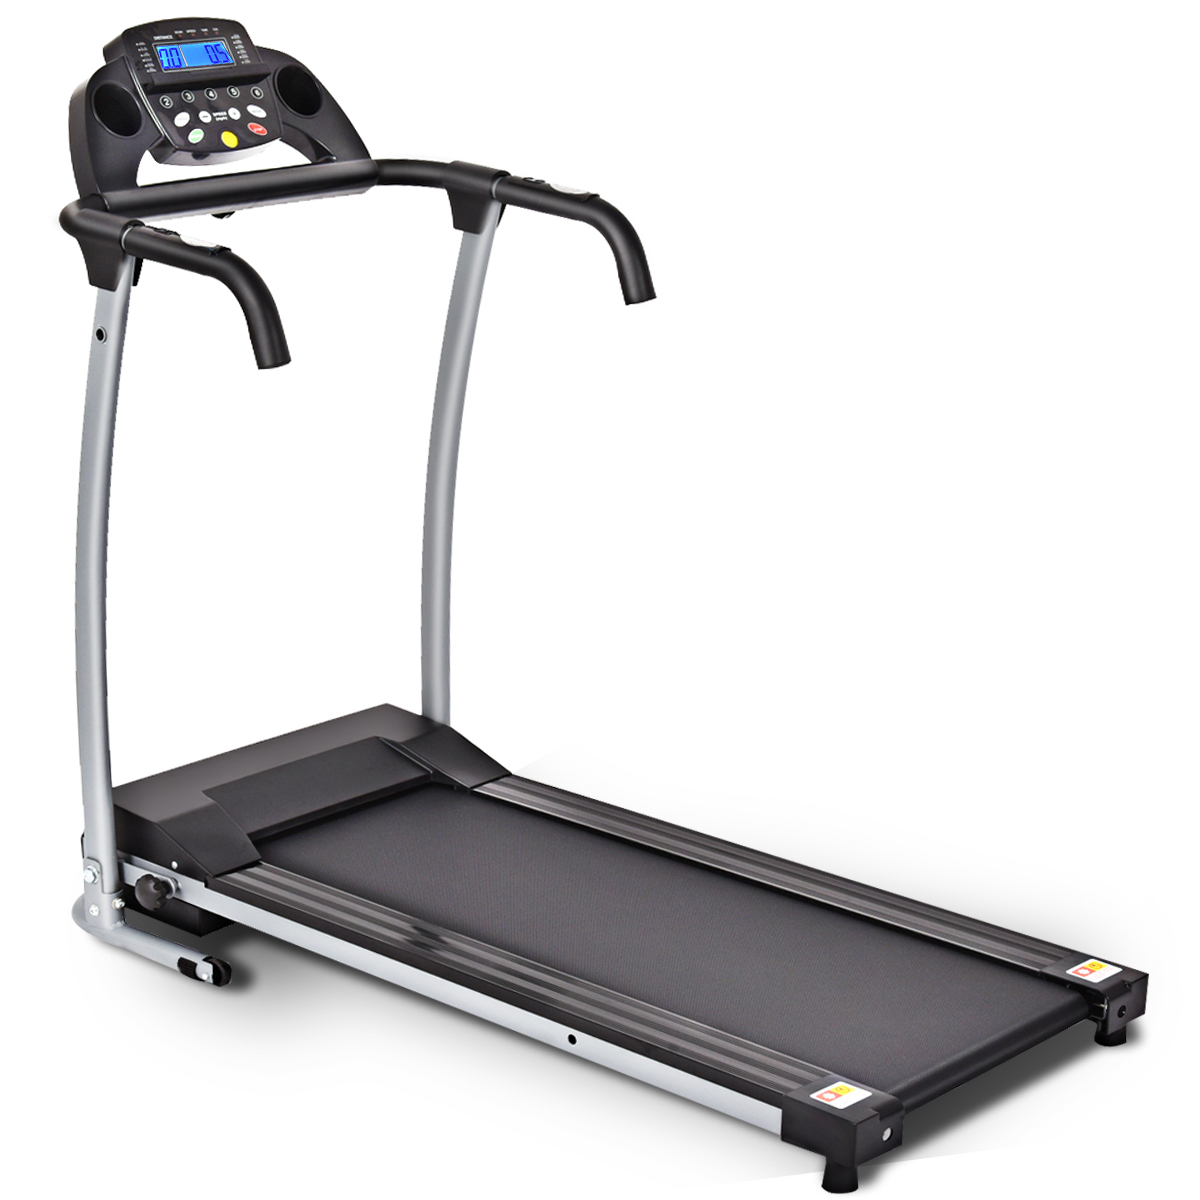 Topbuy 800W Folding Electric Exercise Treadmill Fitness Running Machine - image 2 of 6